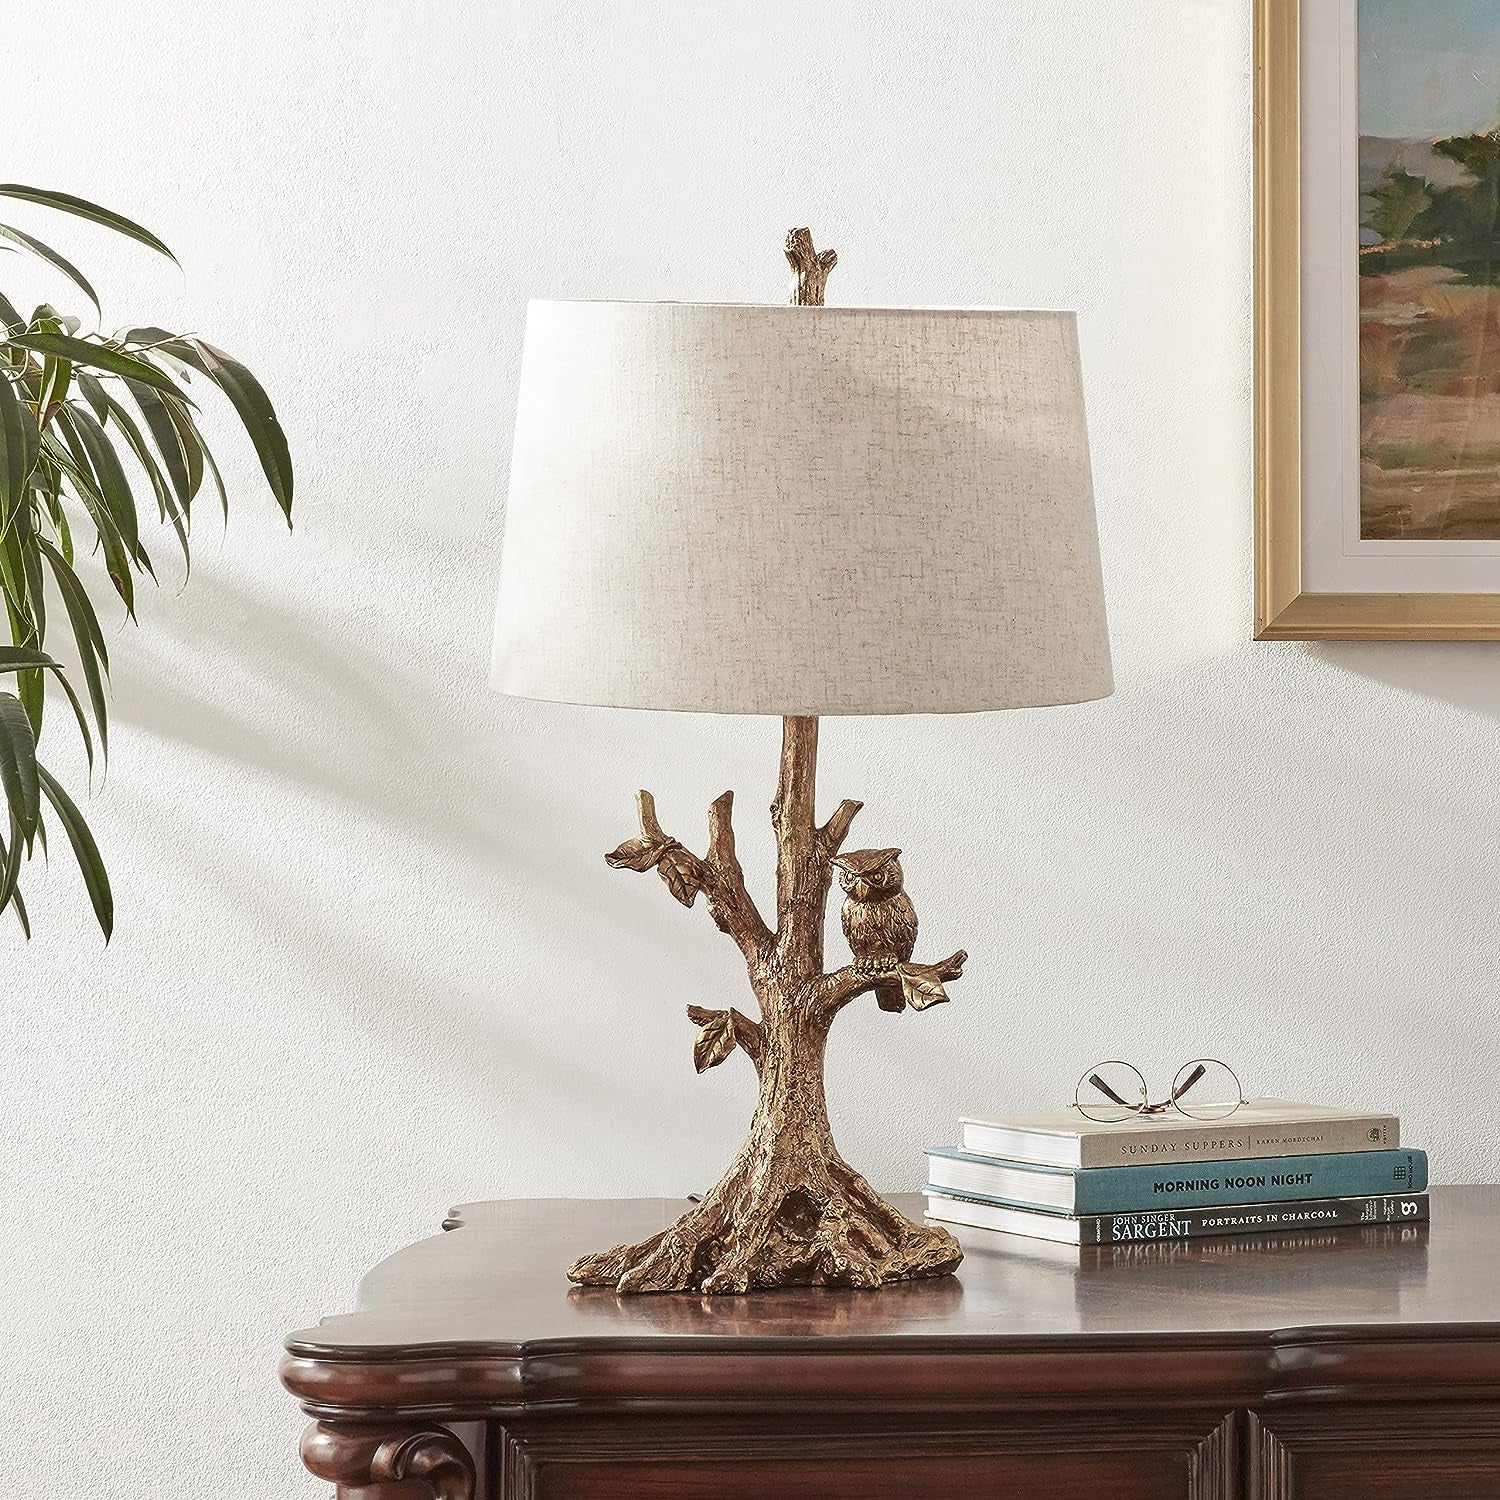 Decor Therapy  Textured Gold Leaf Owl Lamp (TL8987)